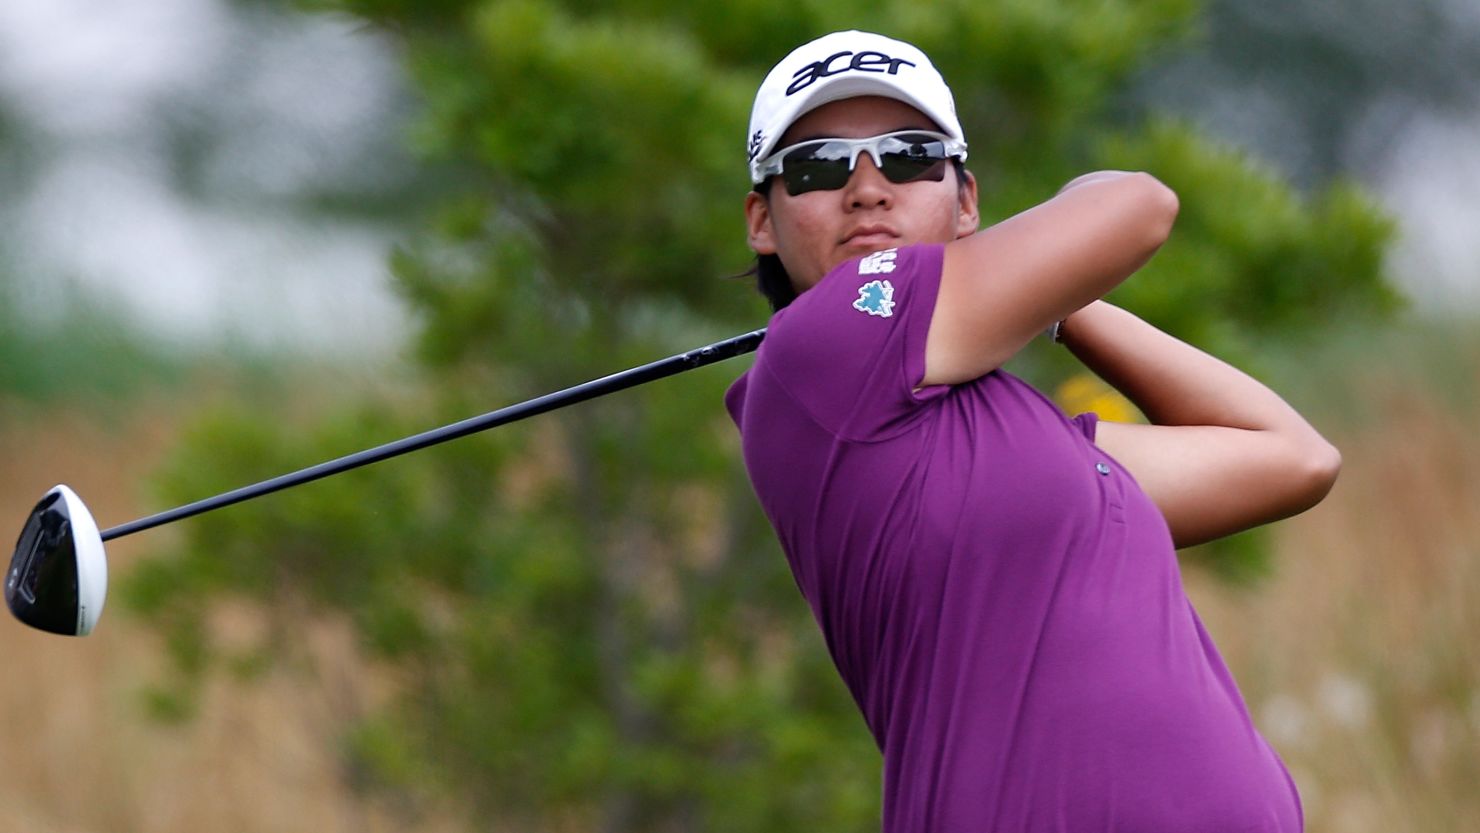 Yani Tseng joined the LPGA Tour in 2008 and is a five-time major winner.